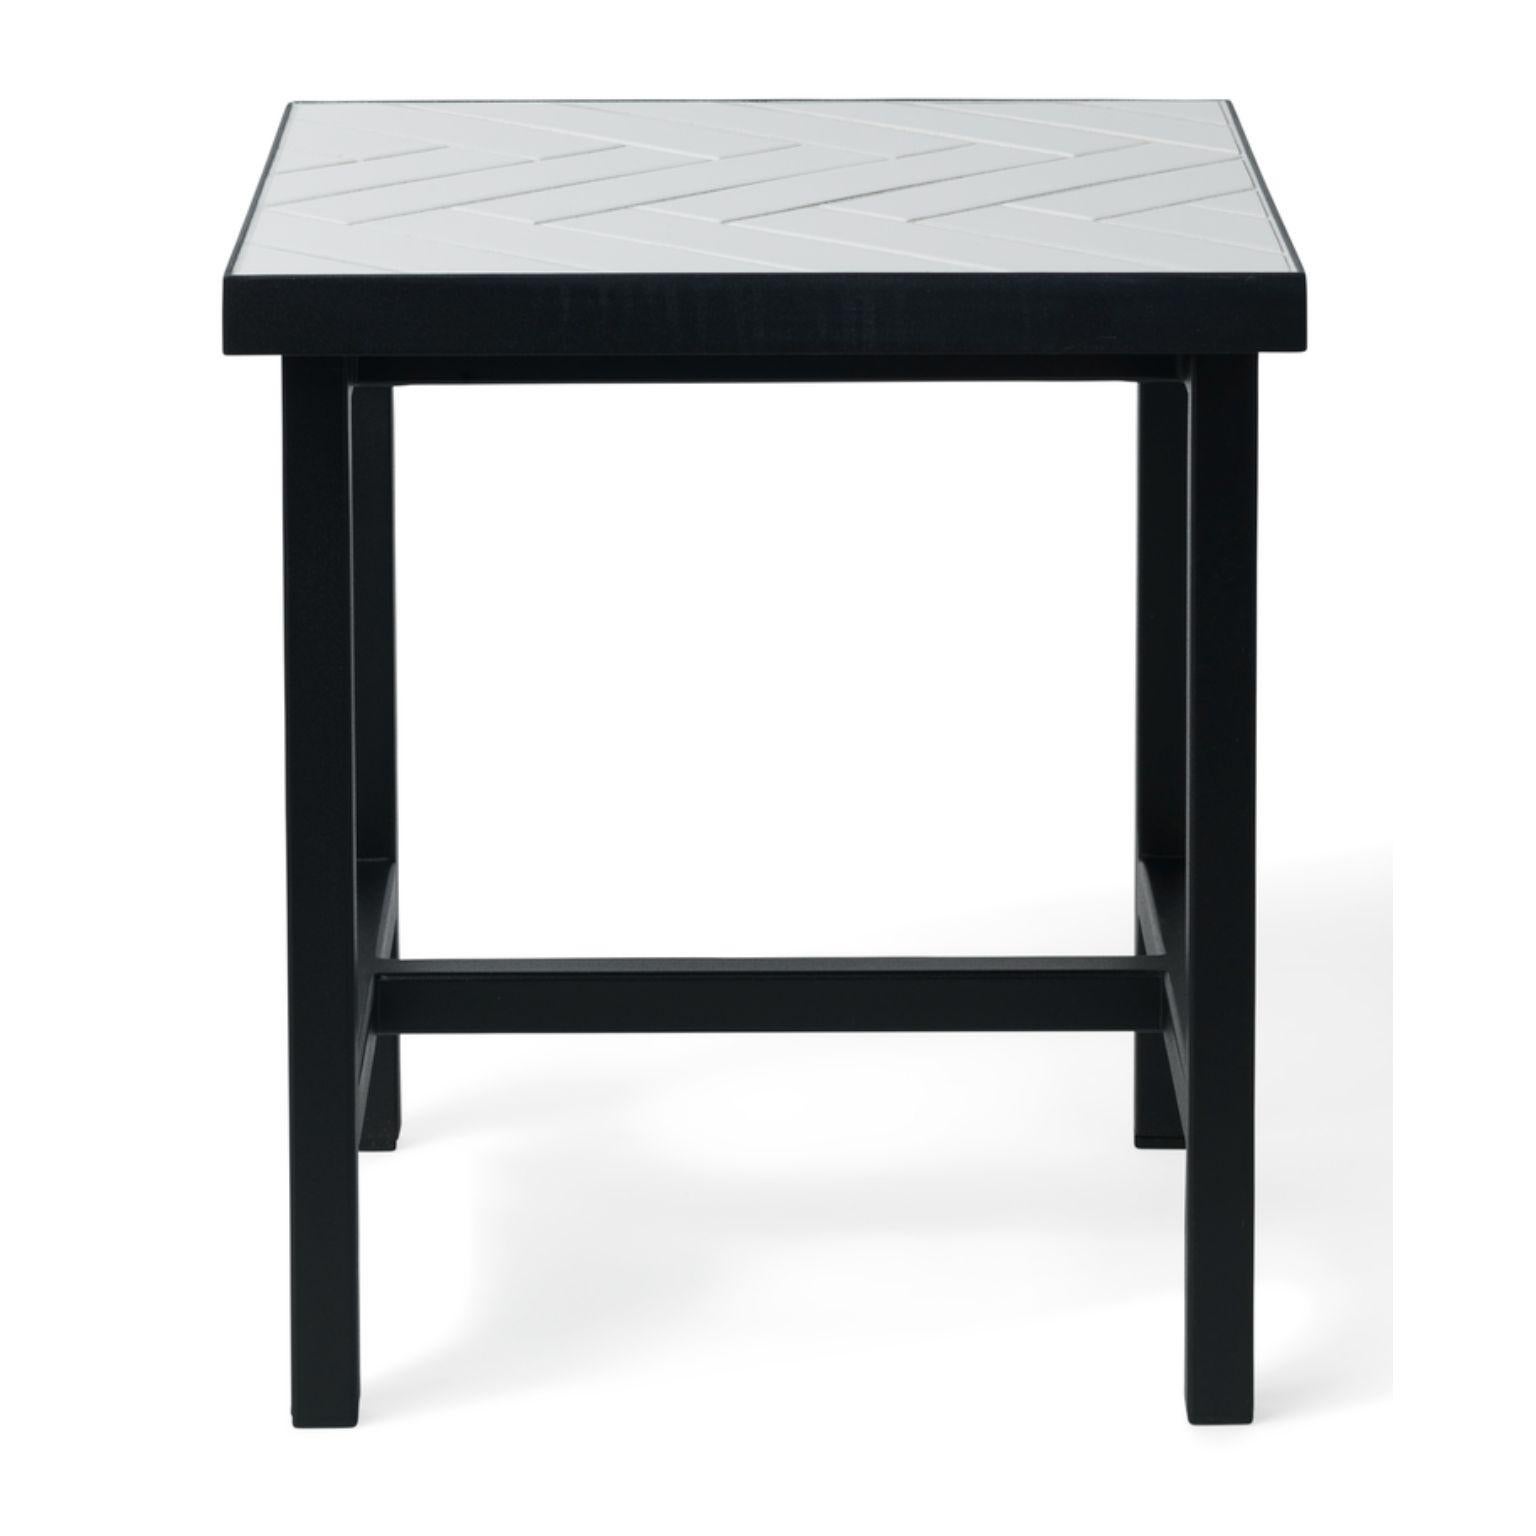 Herringbone tile side table pure white tiles soft black steel by Warm Nordic
Dimensions: D40 x W40 x H44 cm
Material: Ceramic tiles, MDF, Powder coated steel
Weight: 15 kg
Also available in different finishes and dimensions.

Exclusive side